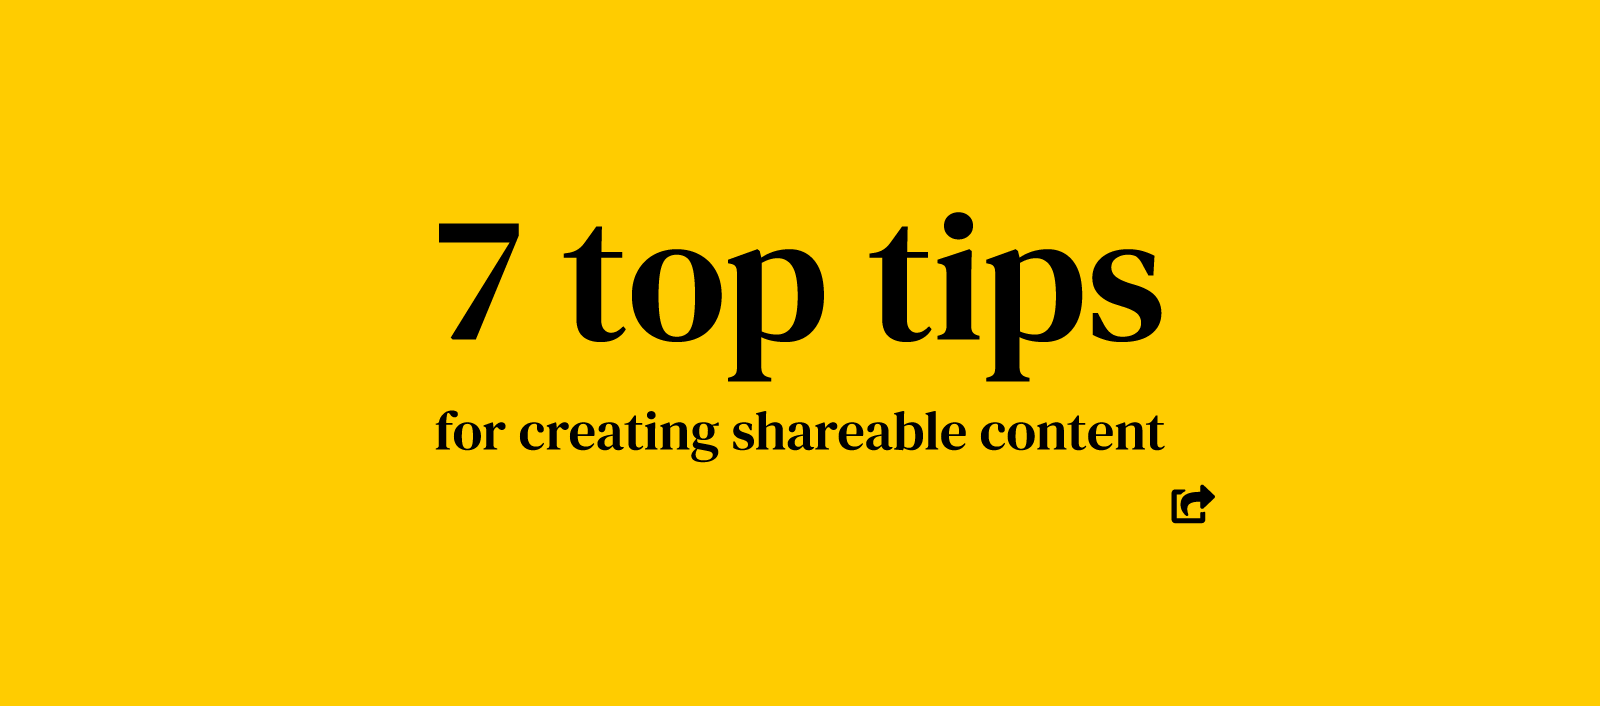 Top tips for creating shareable content banner